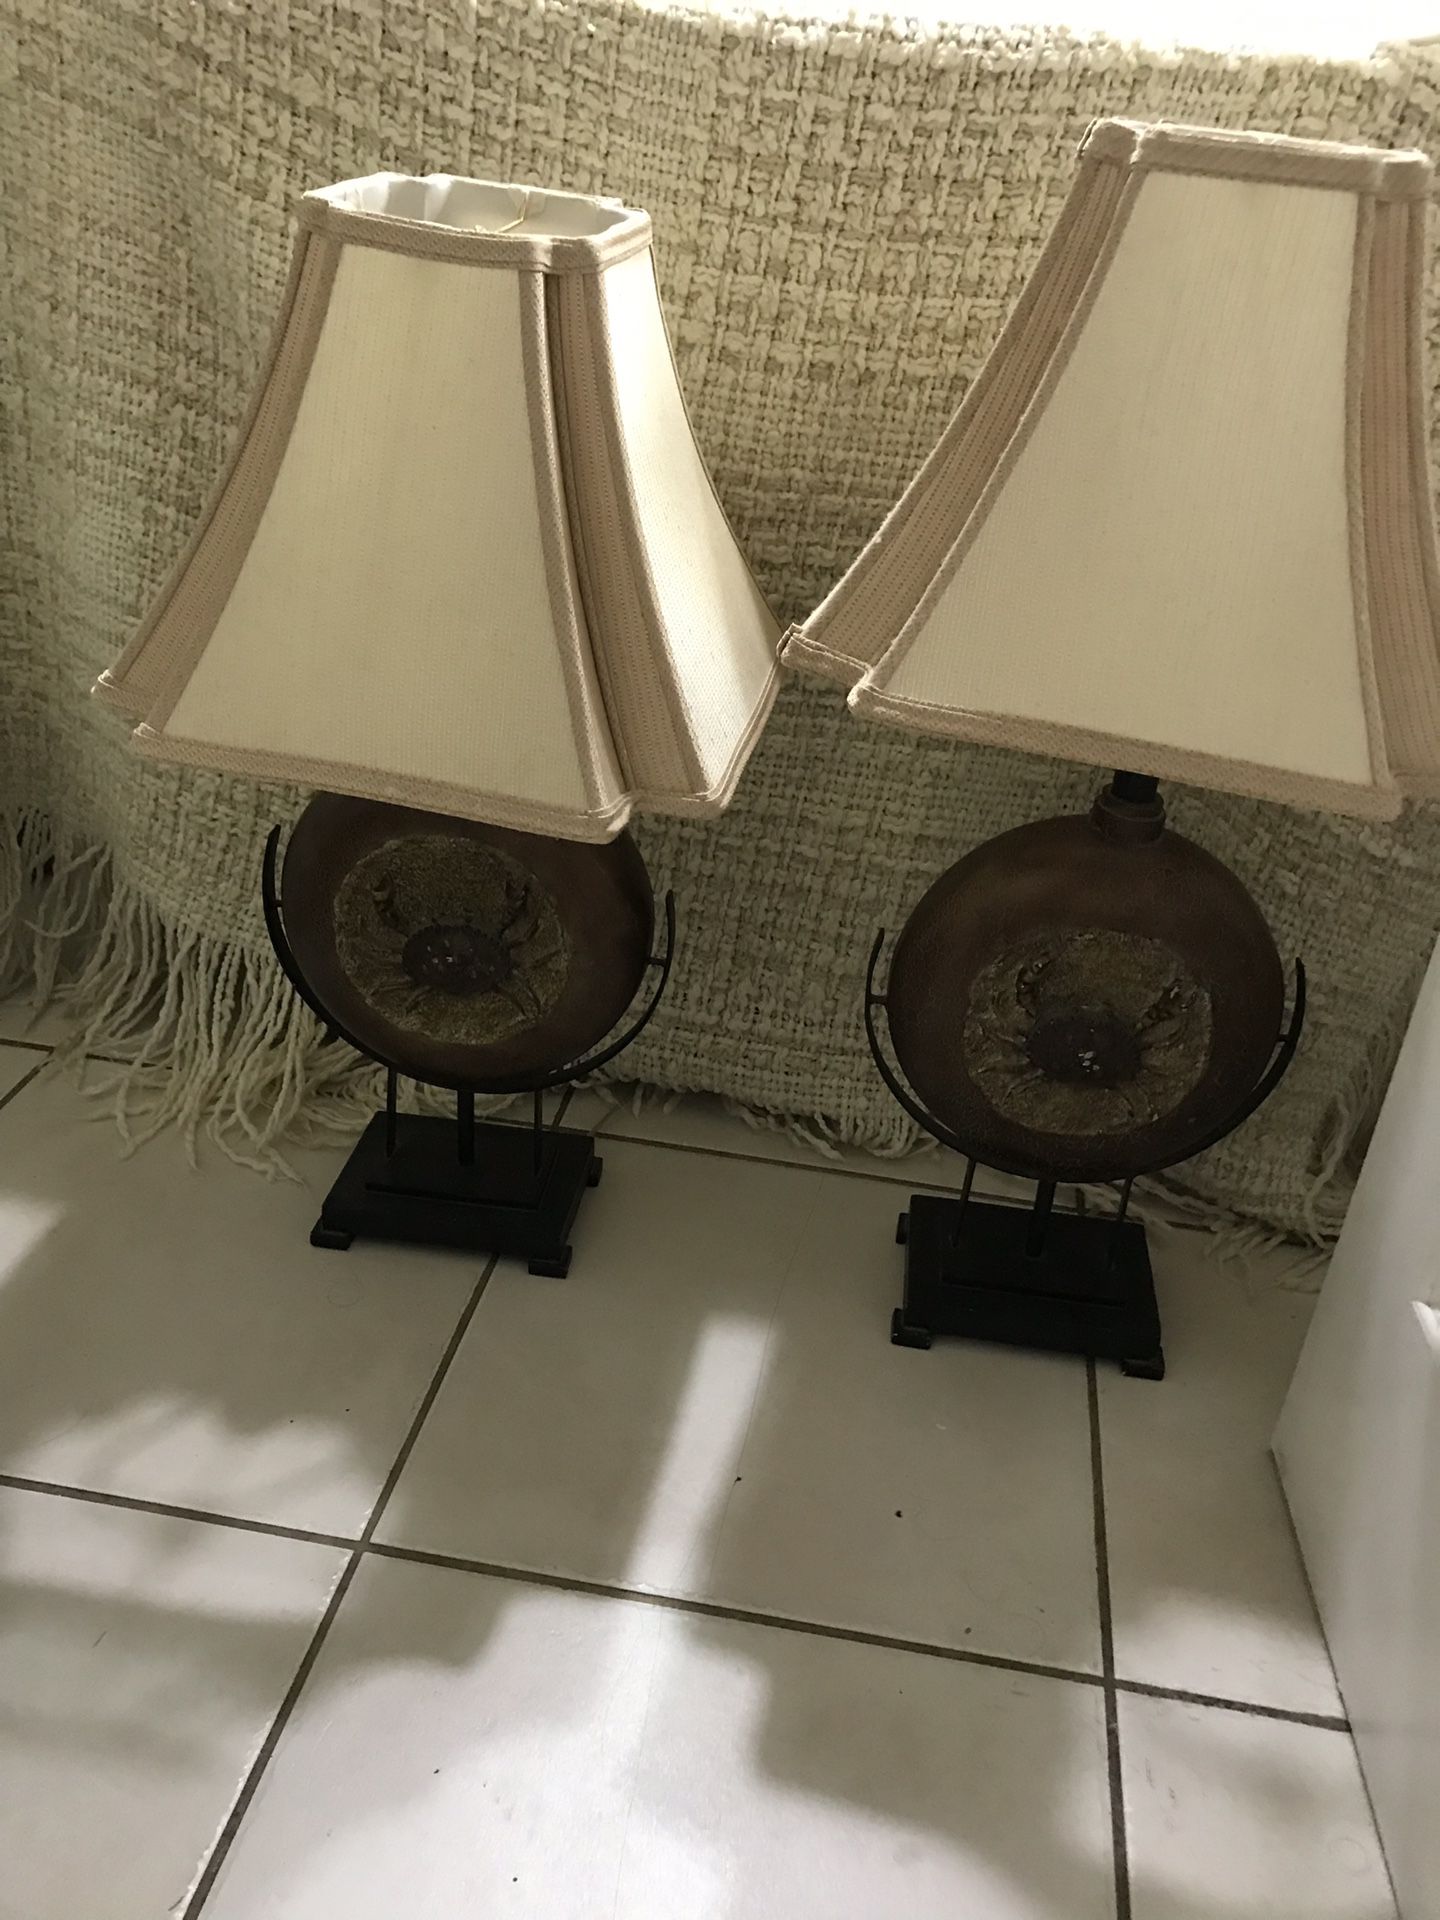 Tool lamp tables decorated with two crabs